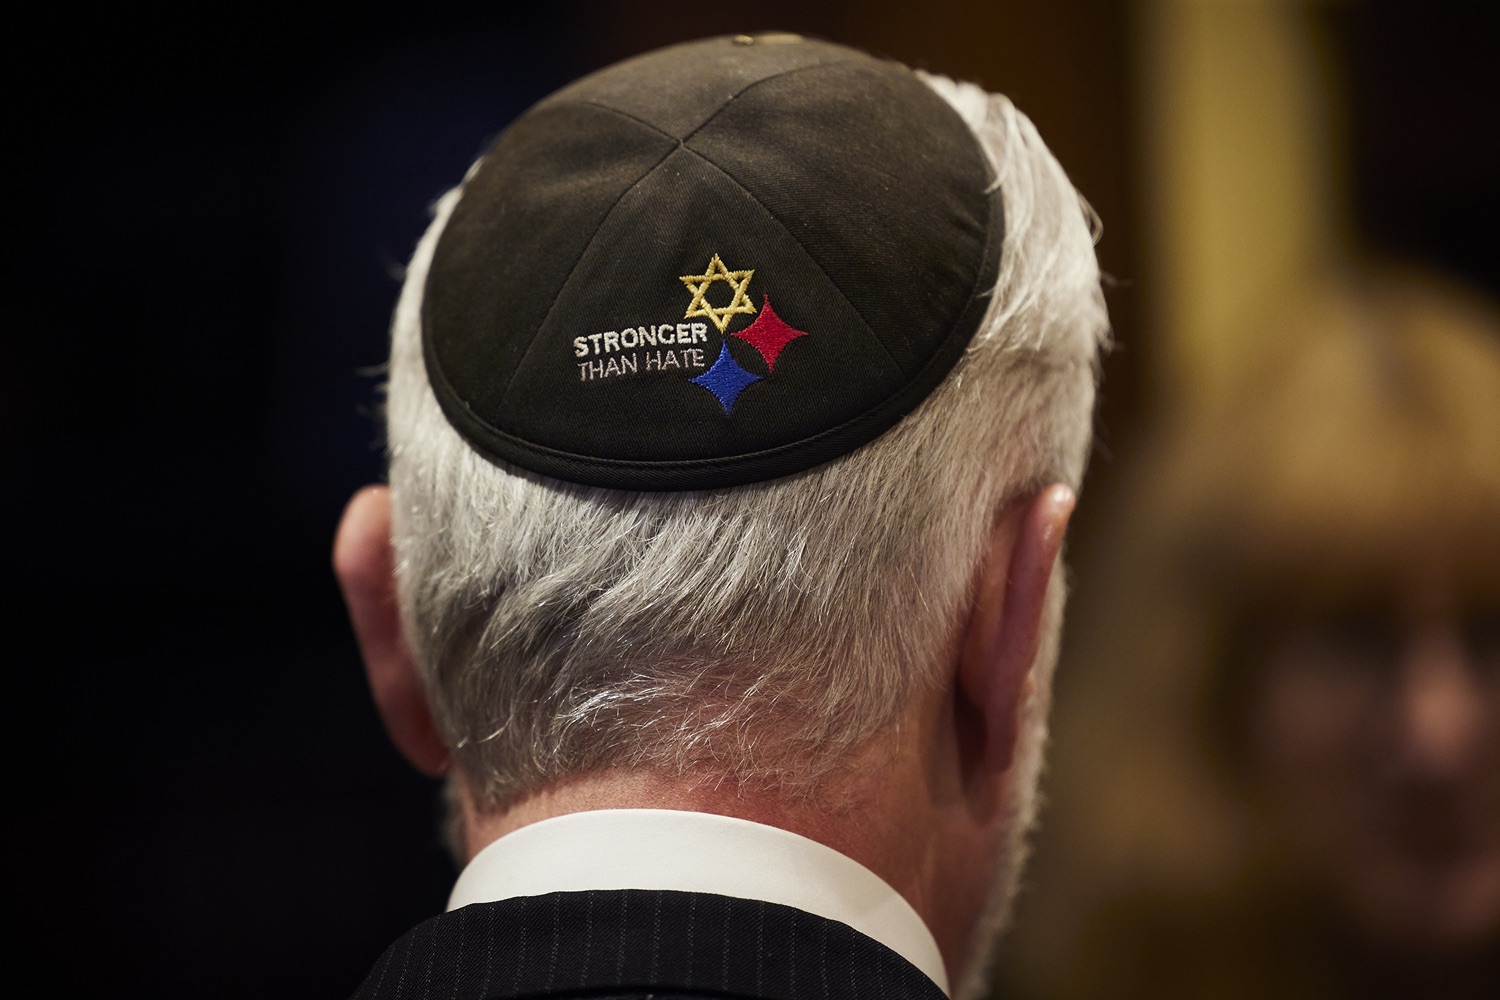 Rabbi Jeffrey Myers wears a Stronger than Hate yarmulke while at Tree of Life synagogue